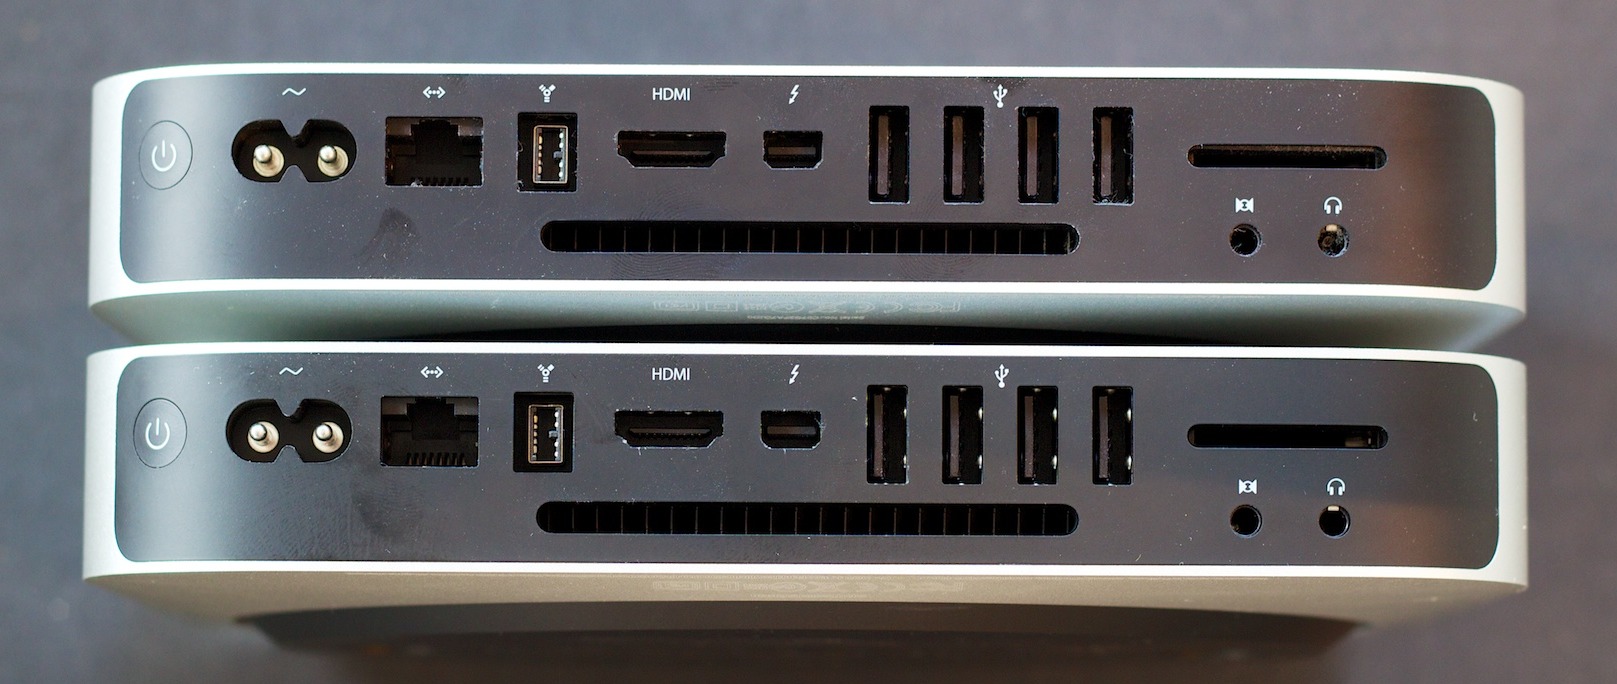 Mac takes the Ivy Bridge to Fusion Town | Ars Technica